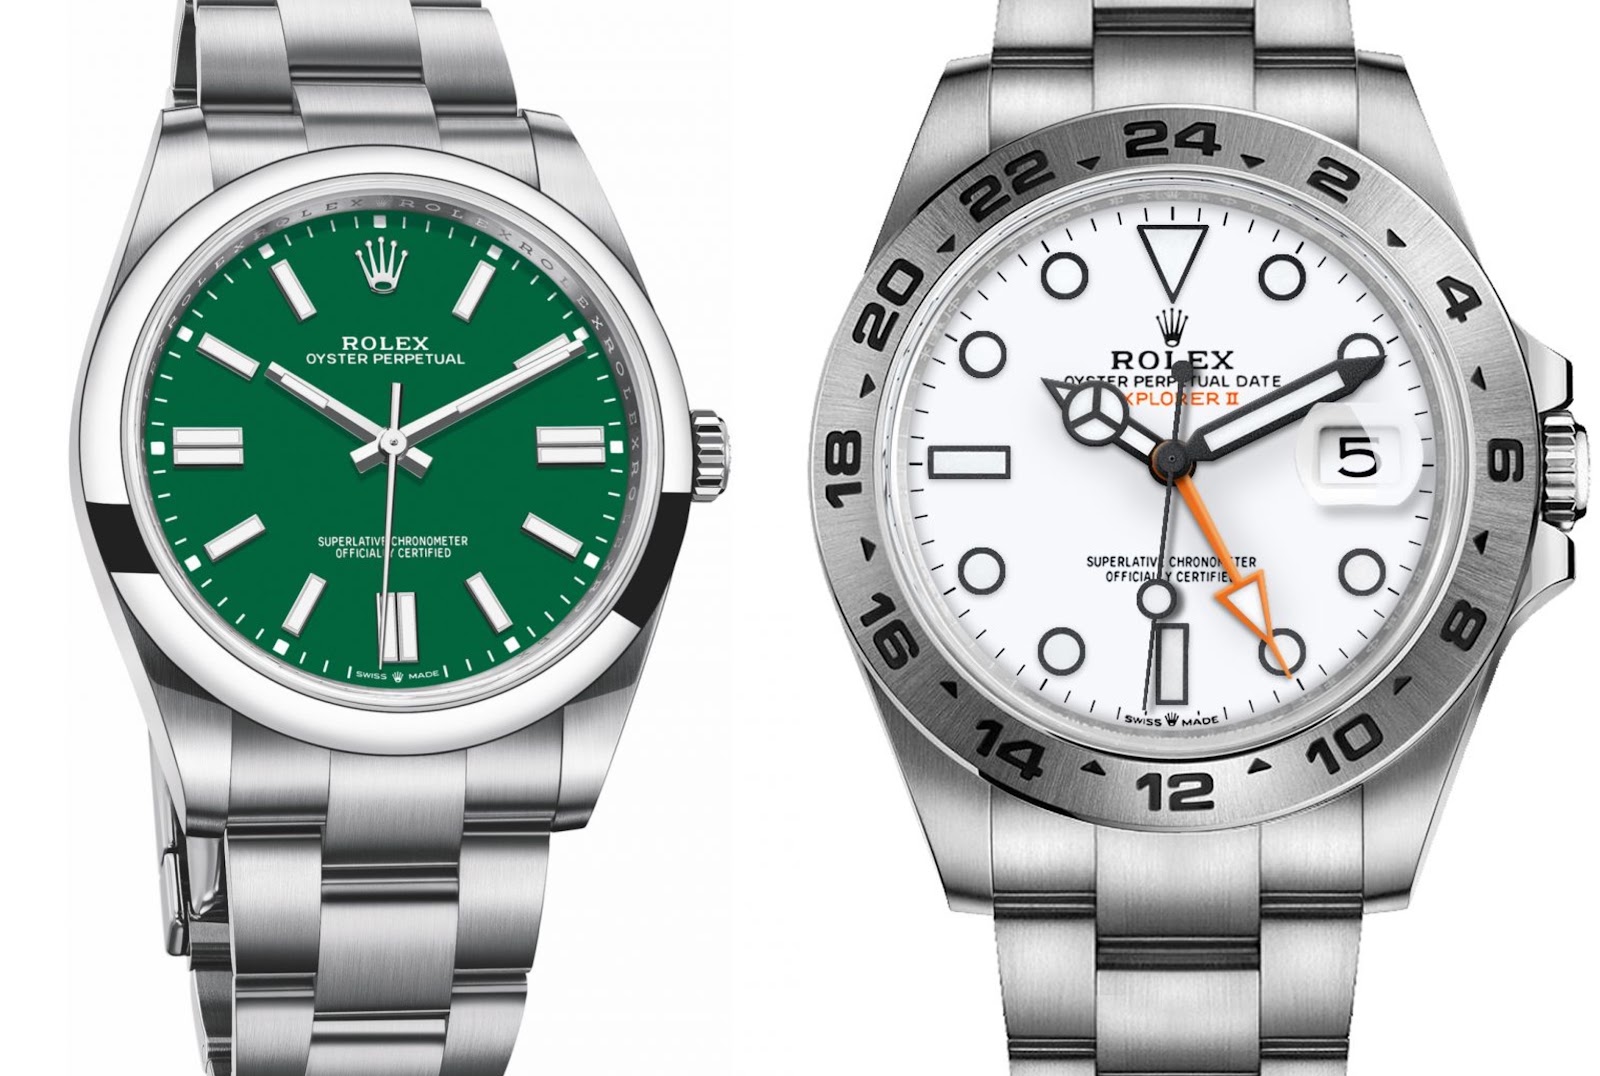 Why Are Rolex Watches So Expensive? | WatchShopping.com